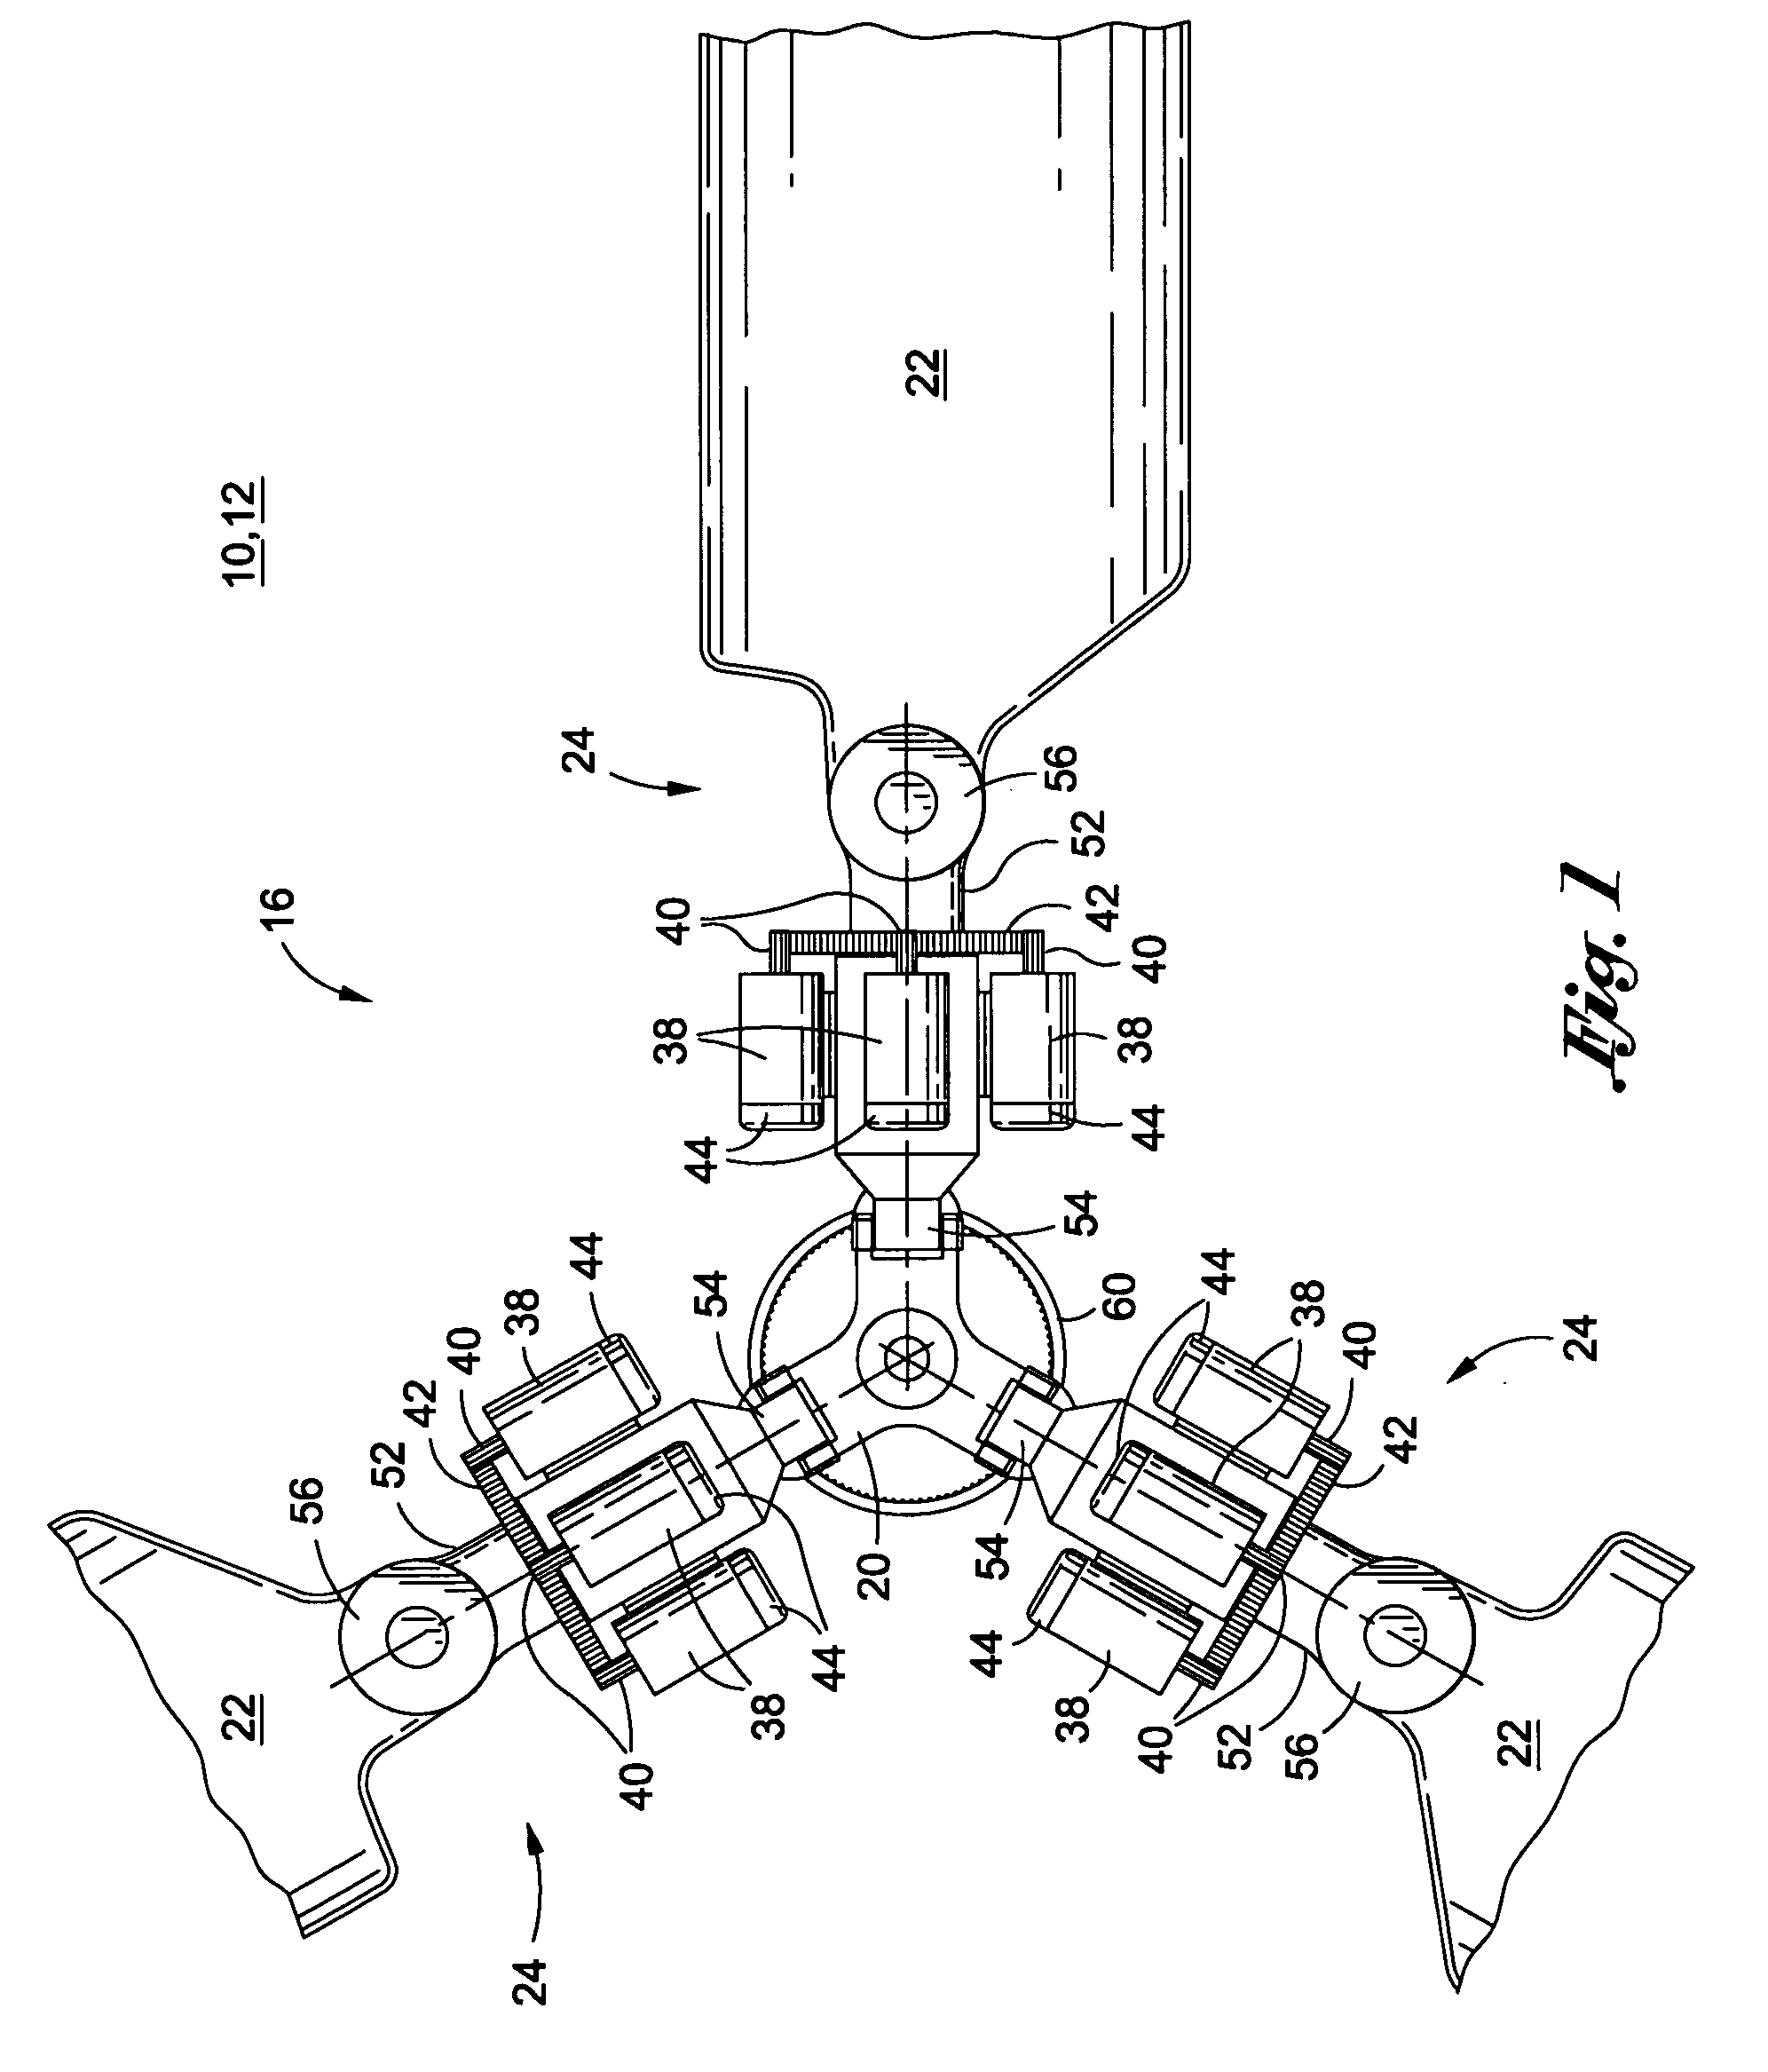 Swashplateless helicopter blade actuation system